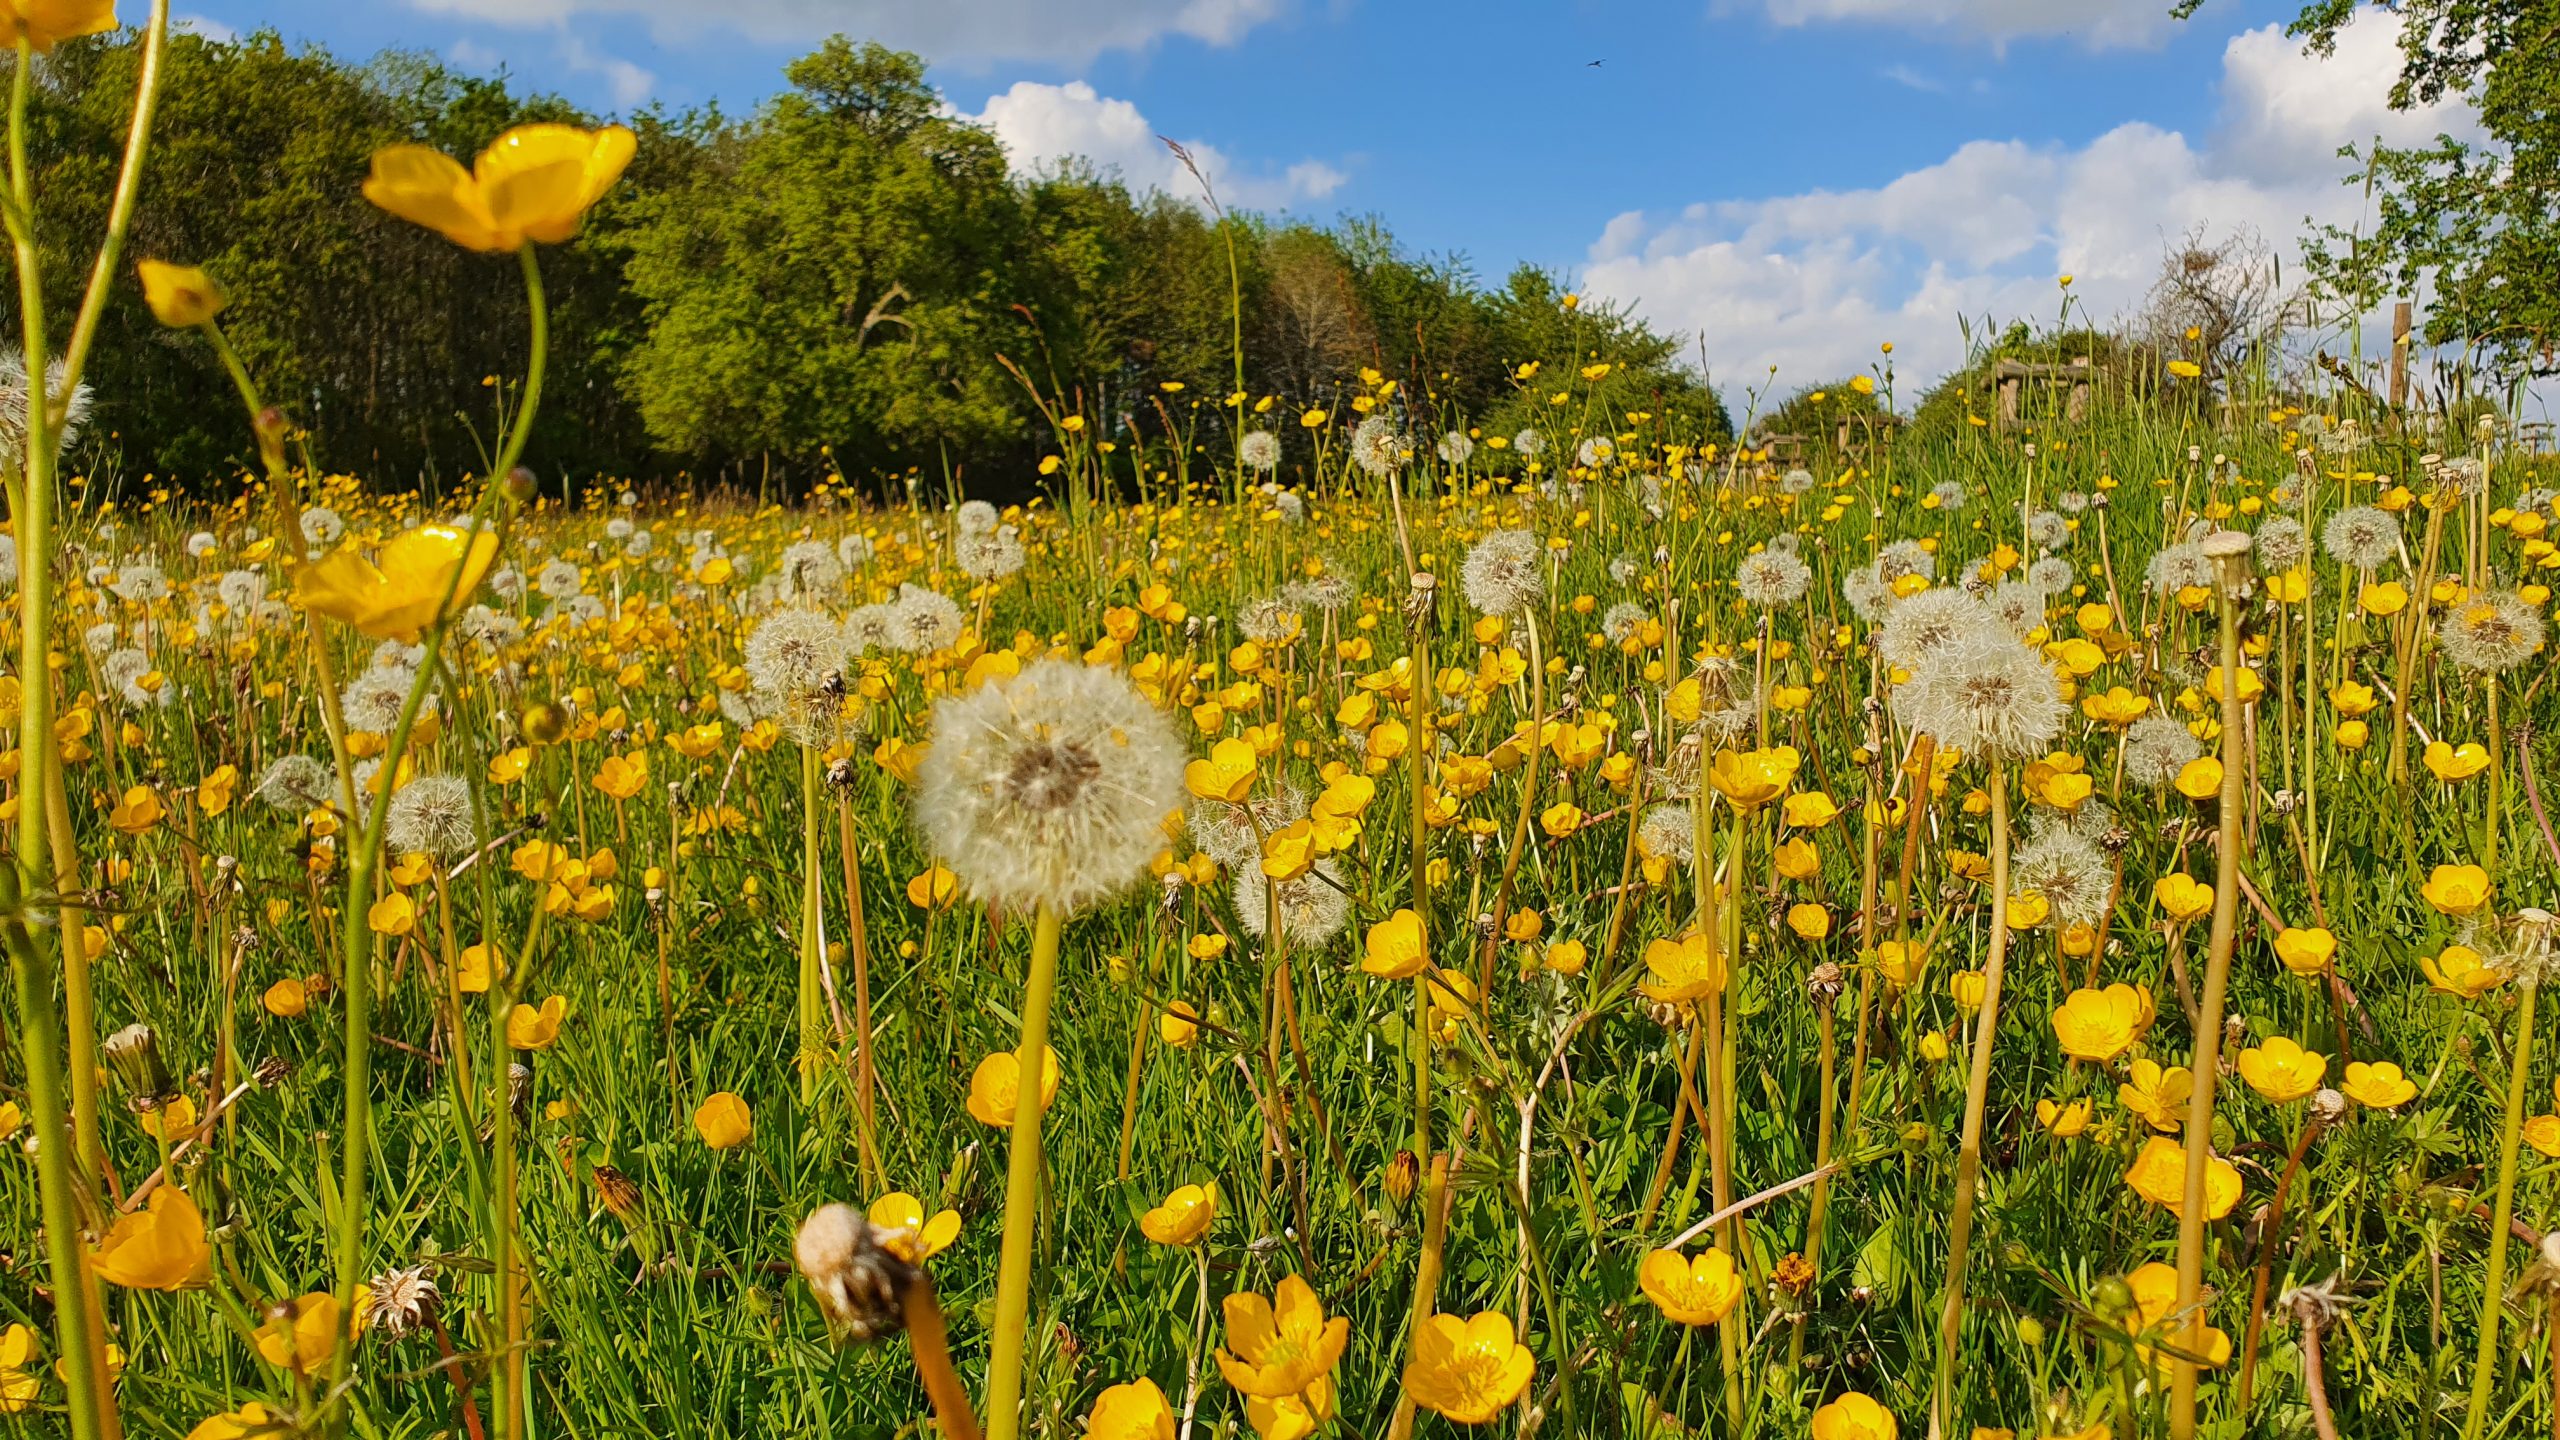 Buttercups and dandelions in the meadow